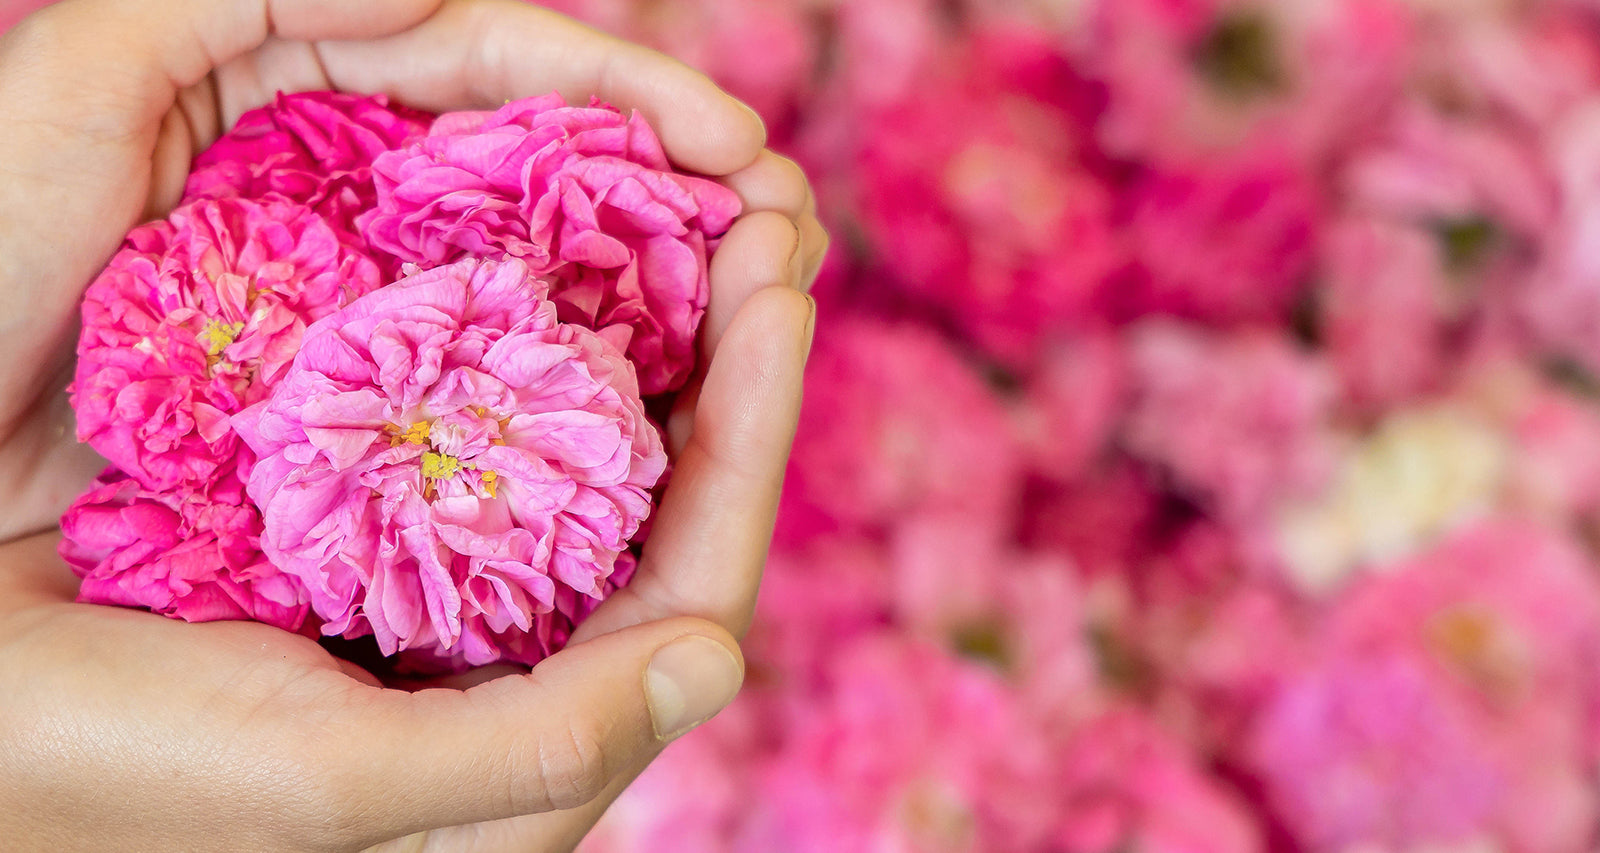 A person is holding a bunch of pink flowers.